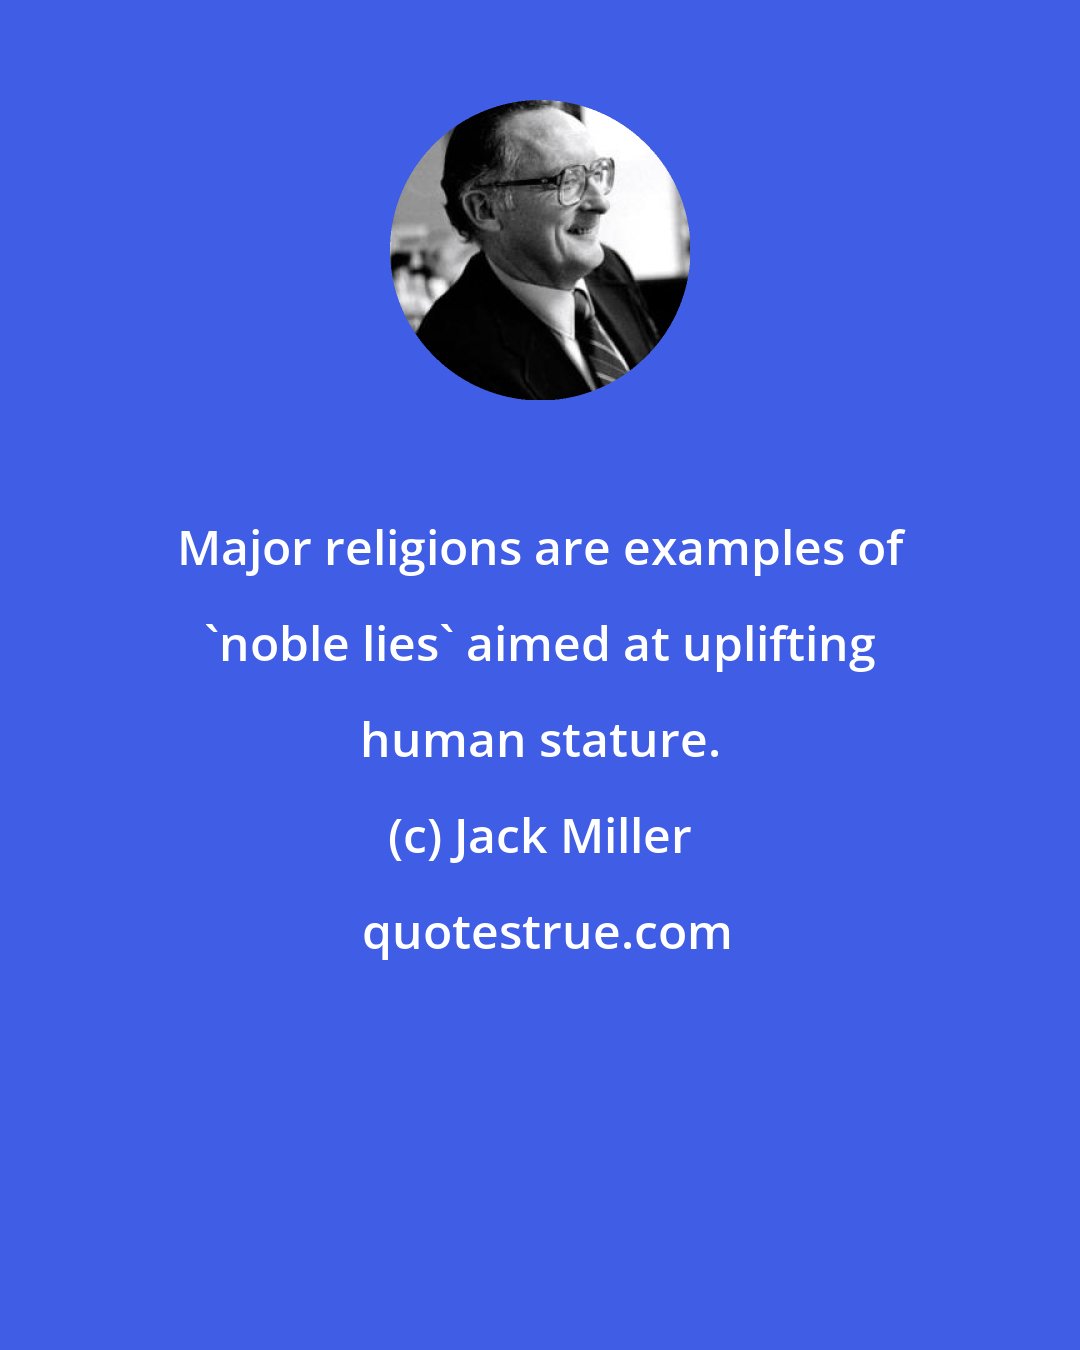 Jack Miller: Major religions are examples of 'noble lies' aimed at uplifting human stature.